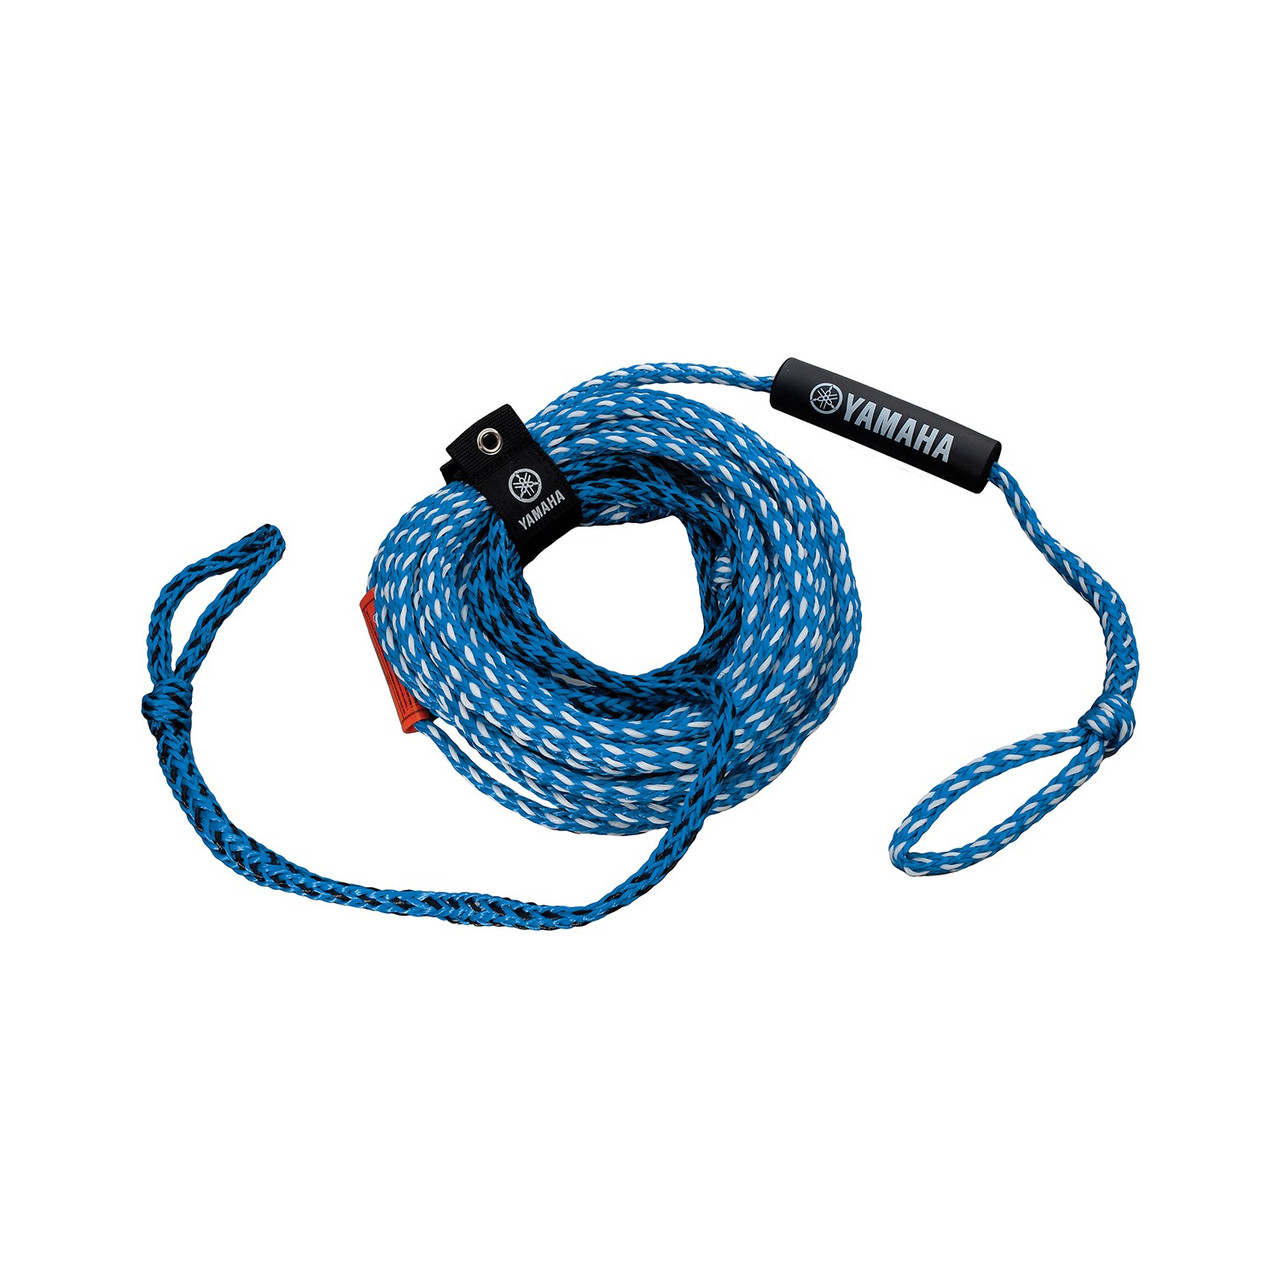 Yamaha New OEM, Blue Branded 1-2 Rider Tube Tow Rope, MAR-TUBER-OP-06